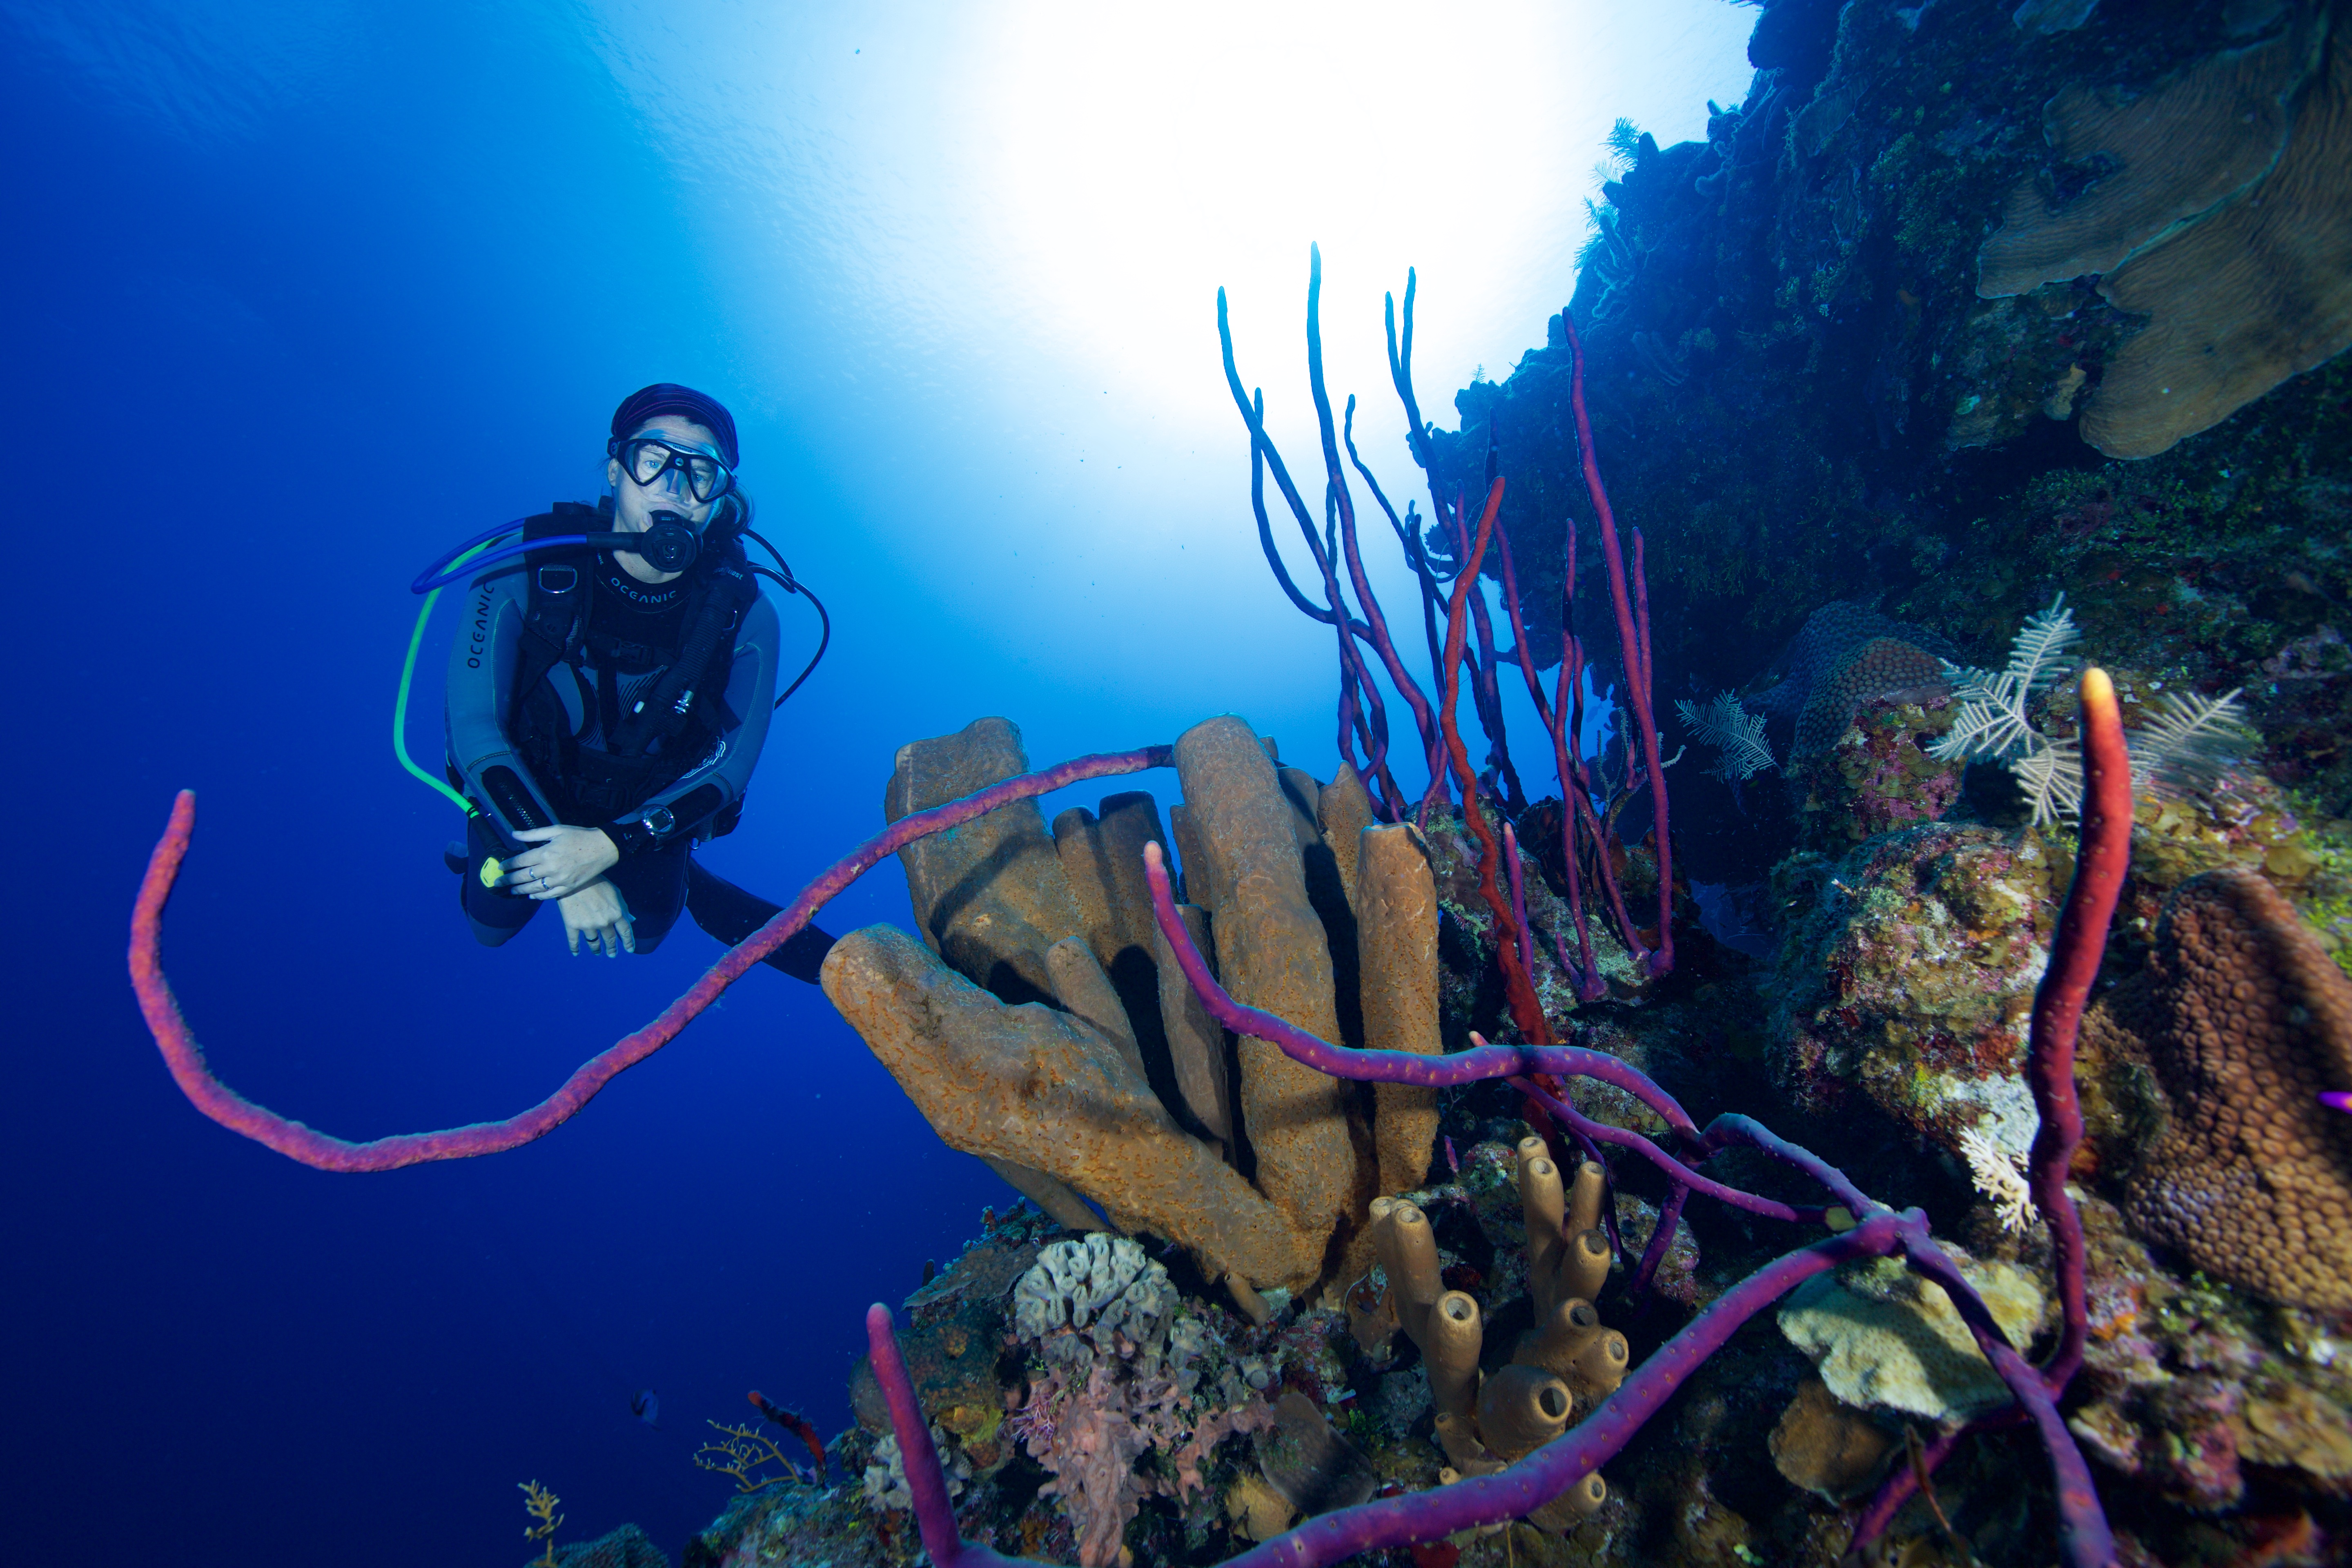 Jamaica April 20-27th, 2019 to explore the reefs of Negril.